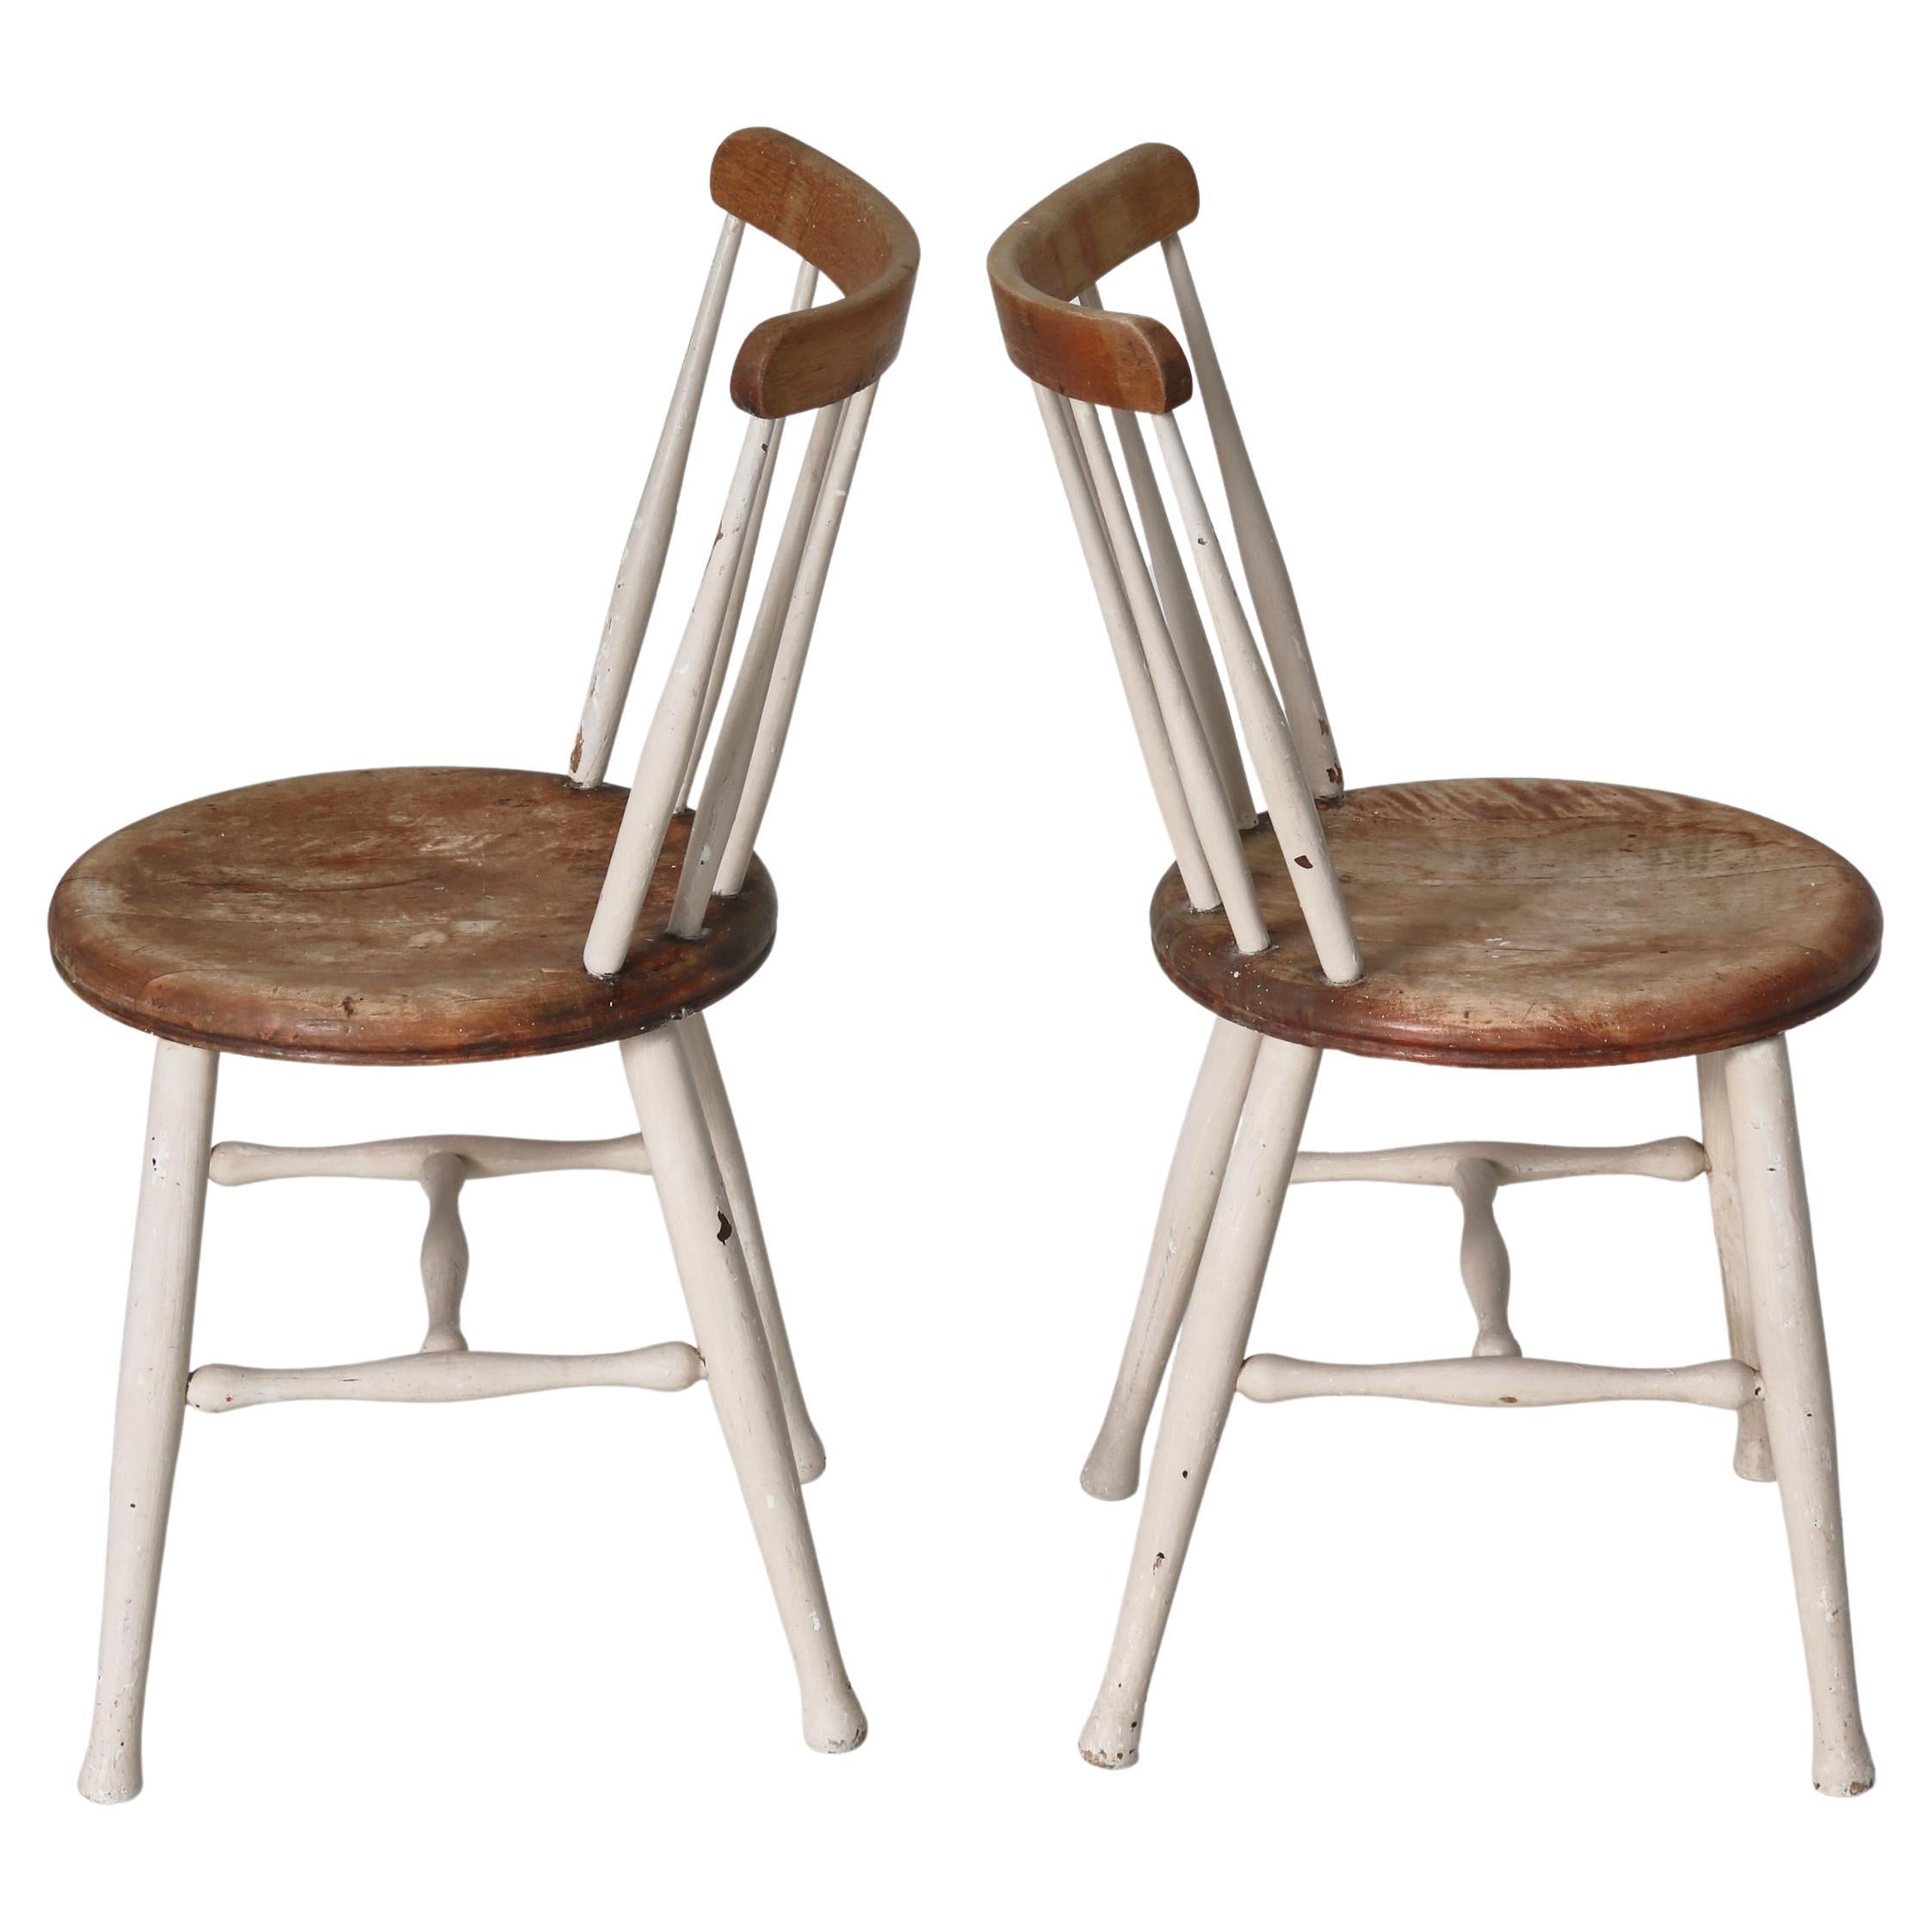 Danish Cabinetmaker Antique Folk Art Spindle Chairs, Early 20th Century For Sale